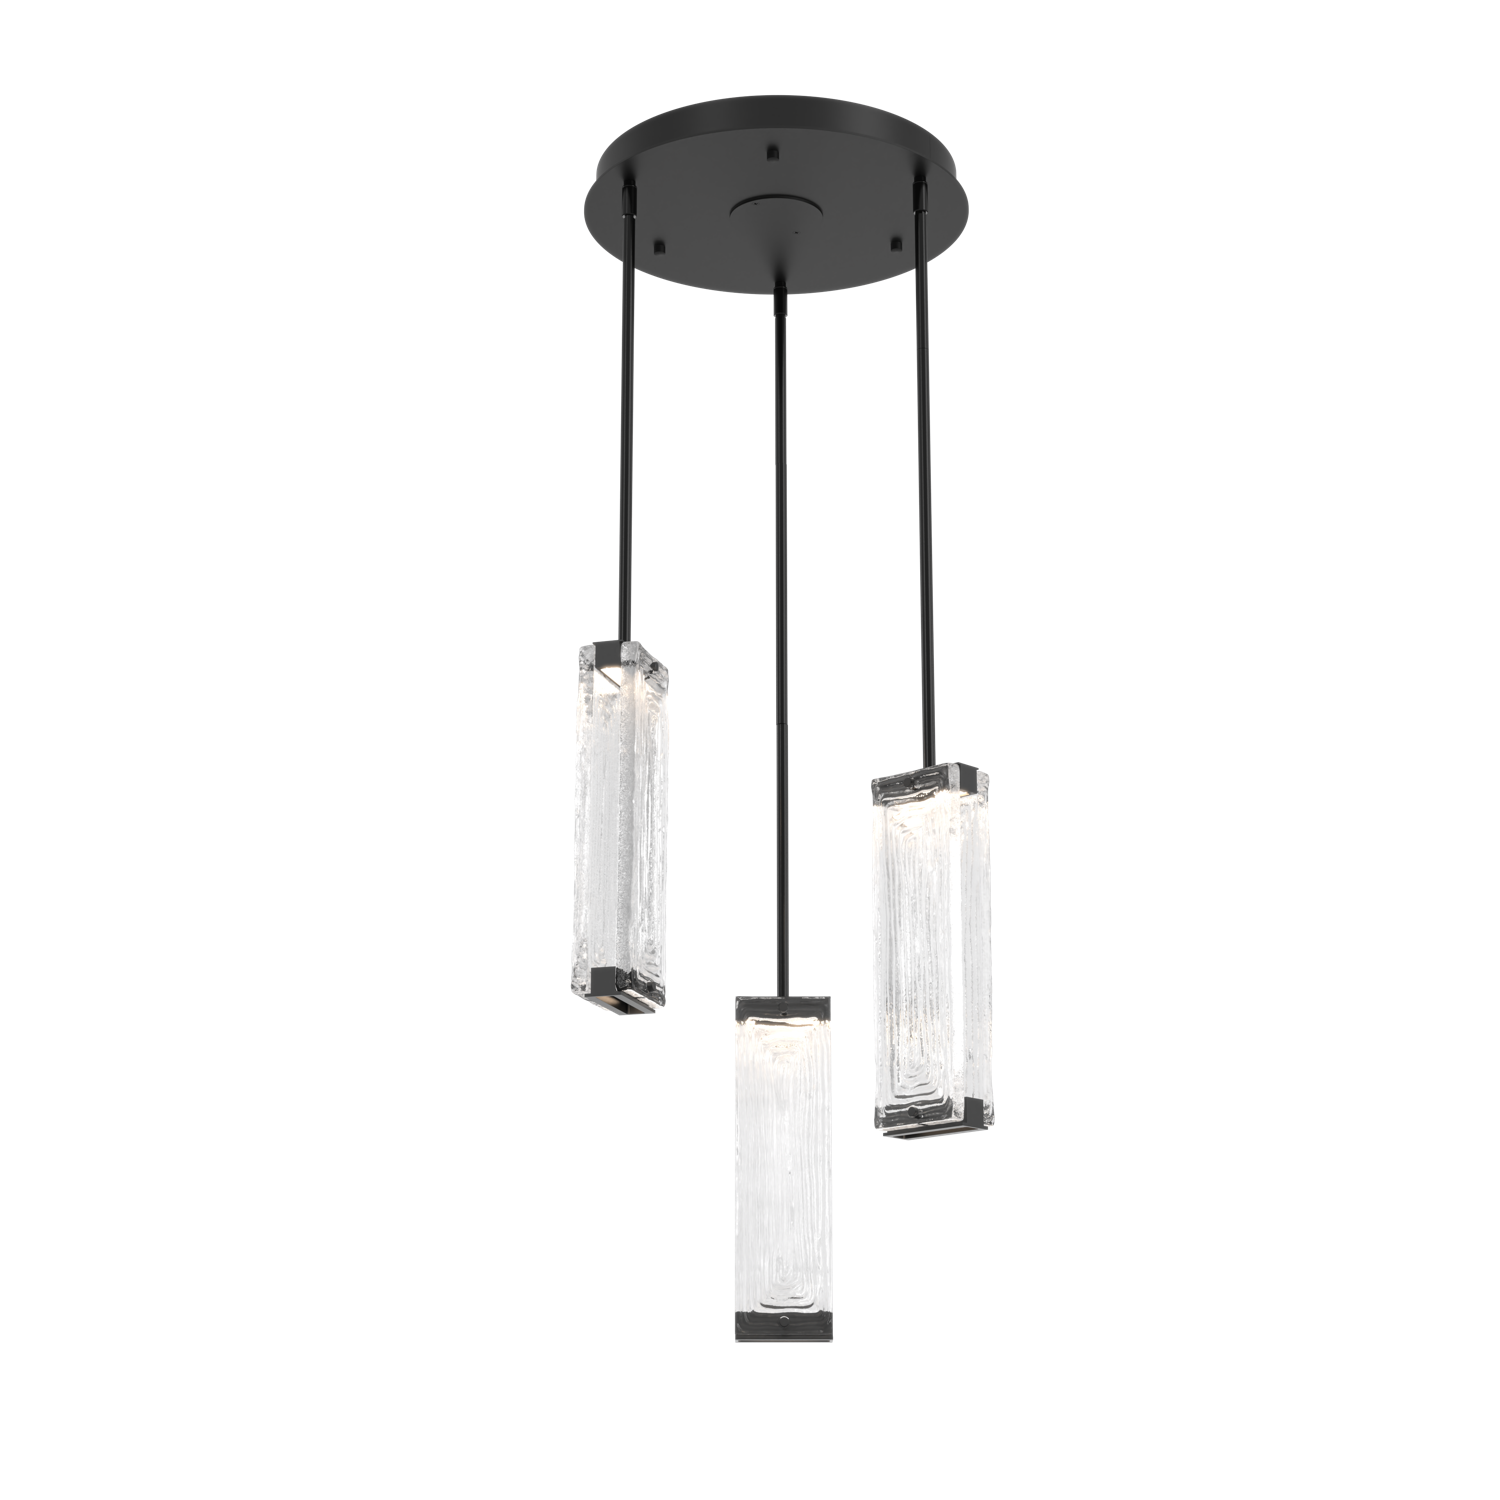 CHB0090-03-MB-TL-Hammerton-Studio-Tabulo-3-light-multi-pendant-chandelier-with-matte-black-finish-and-clear-linea-cast-glass-shade-and-LED-lamping